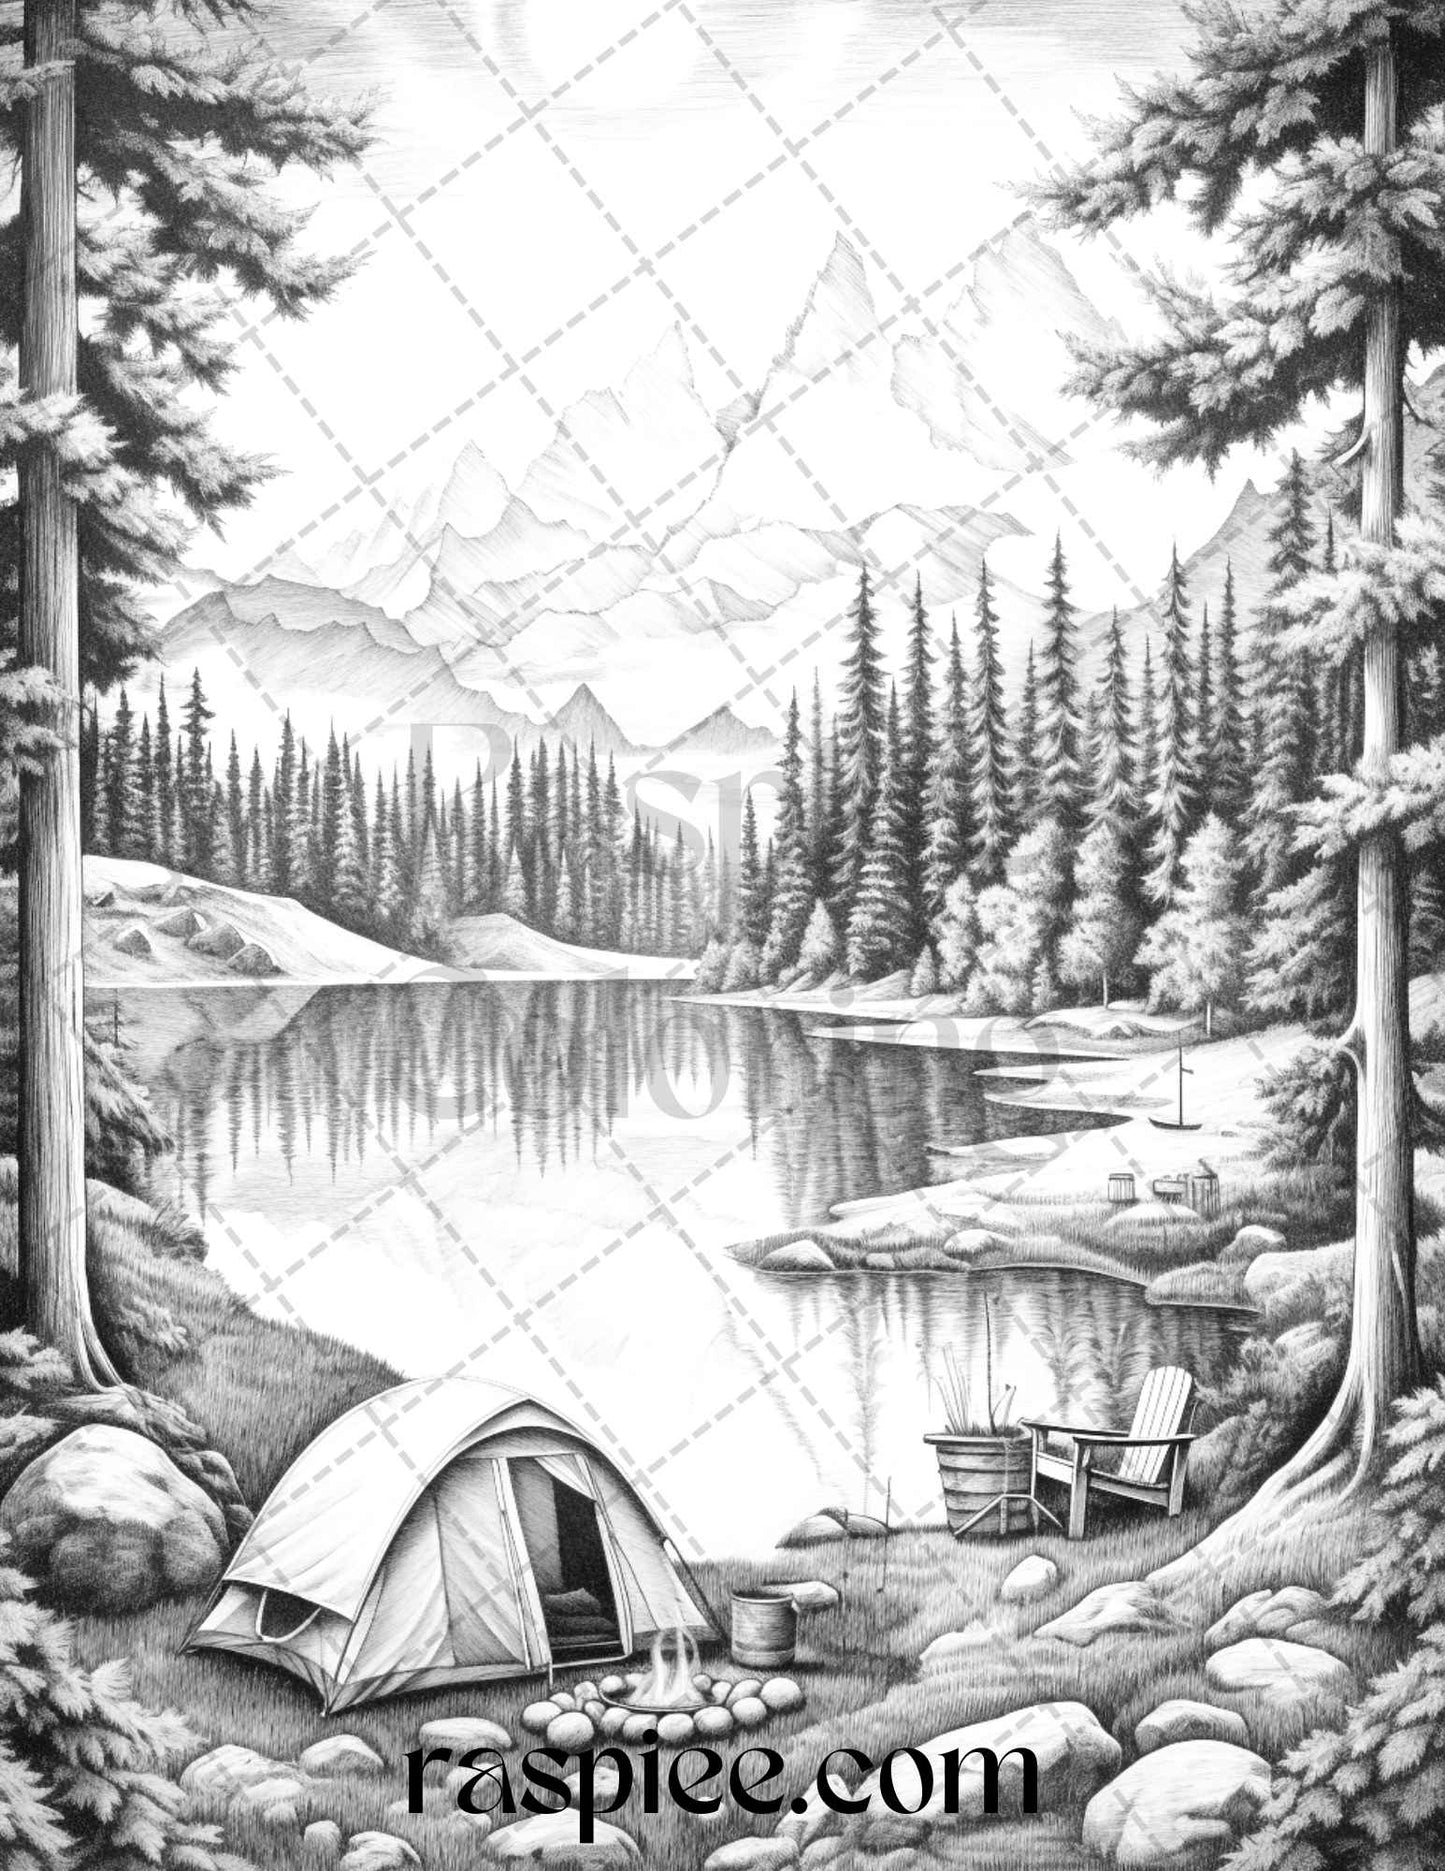 Nature Camping Grayscale Coloring Pages Printable, Relaxing Outdoor Scenes, PDF File Instant Download - raspiee